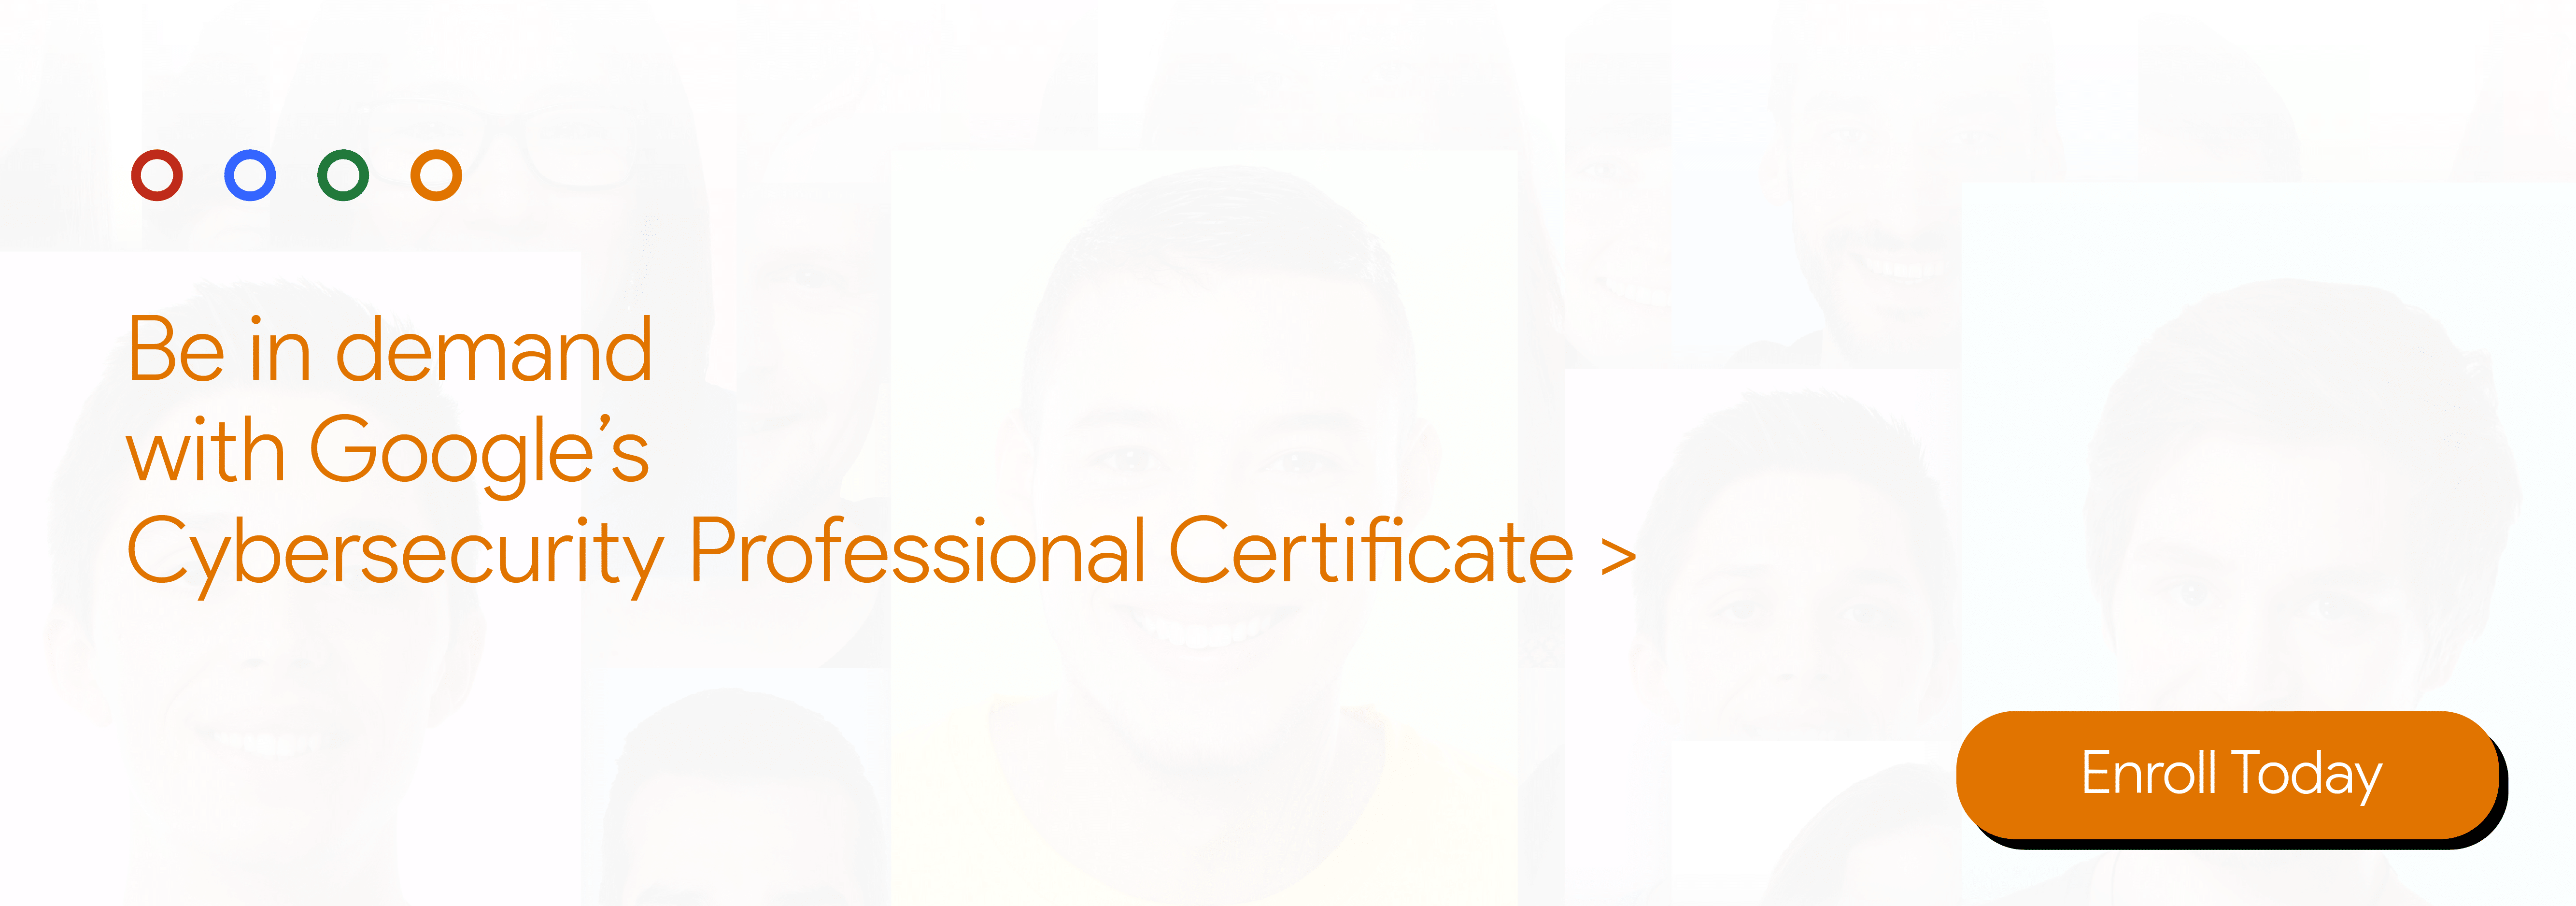 Enroll in Google's Cybersecurity Professional Certification Course!